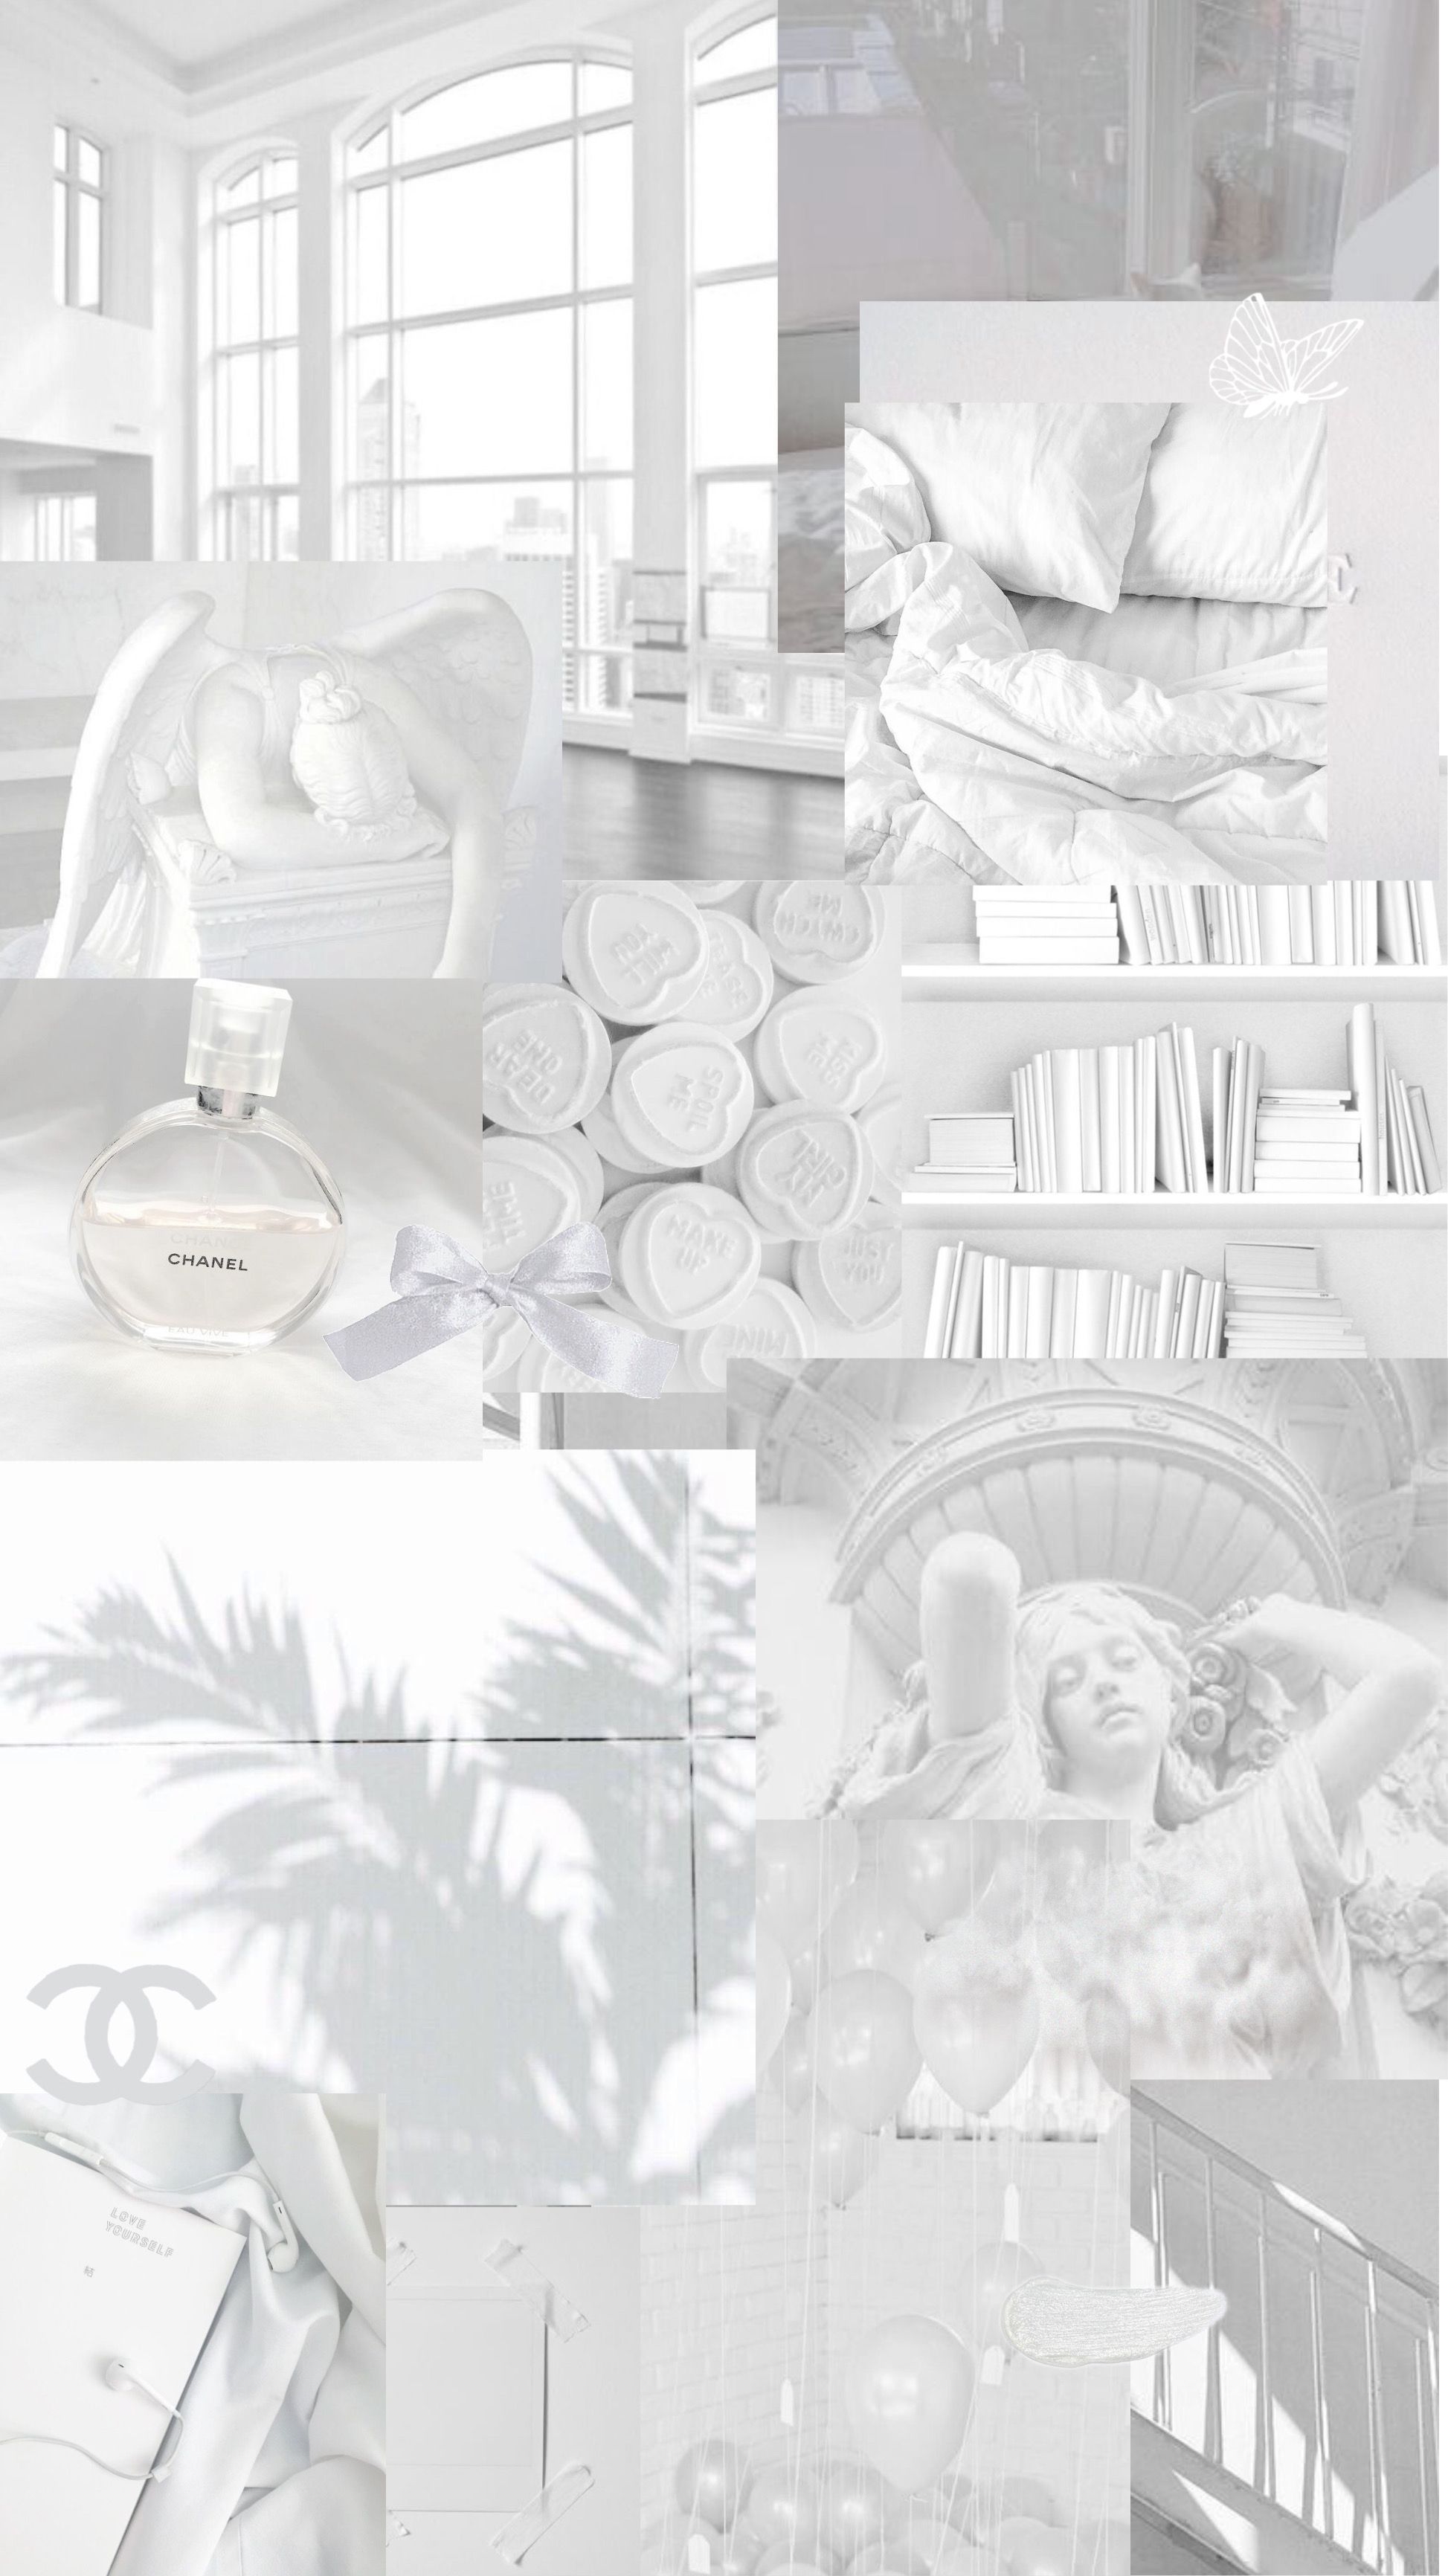 Aesthetic Collage, White, Chanel, Chanel Aesthetic, Chanel Collage, Chanel Collage Aesthetic, Chanel Collage White, Chanel Collage White Aesthetic, Chanel Collage White Aesthetic - White, cute white